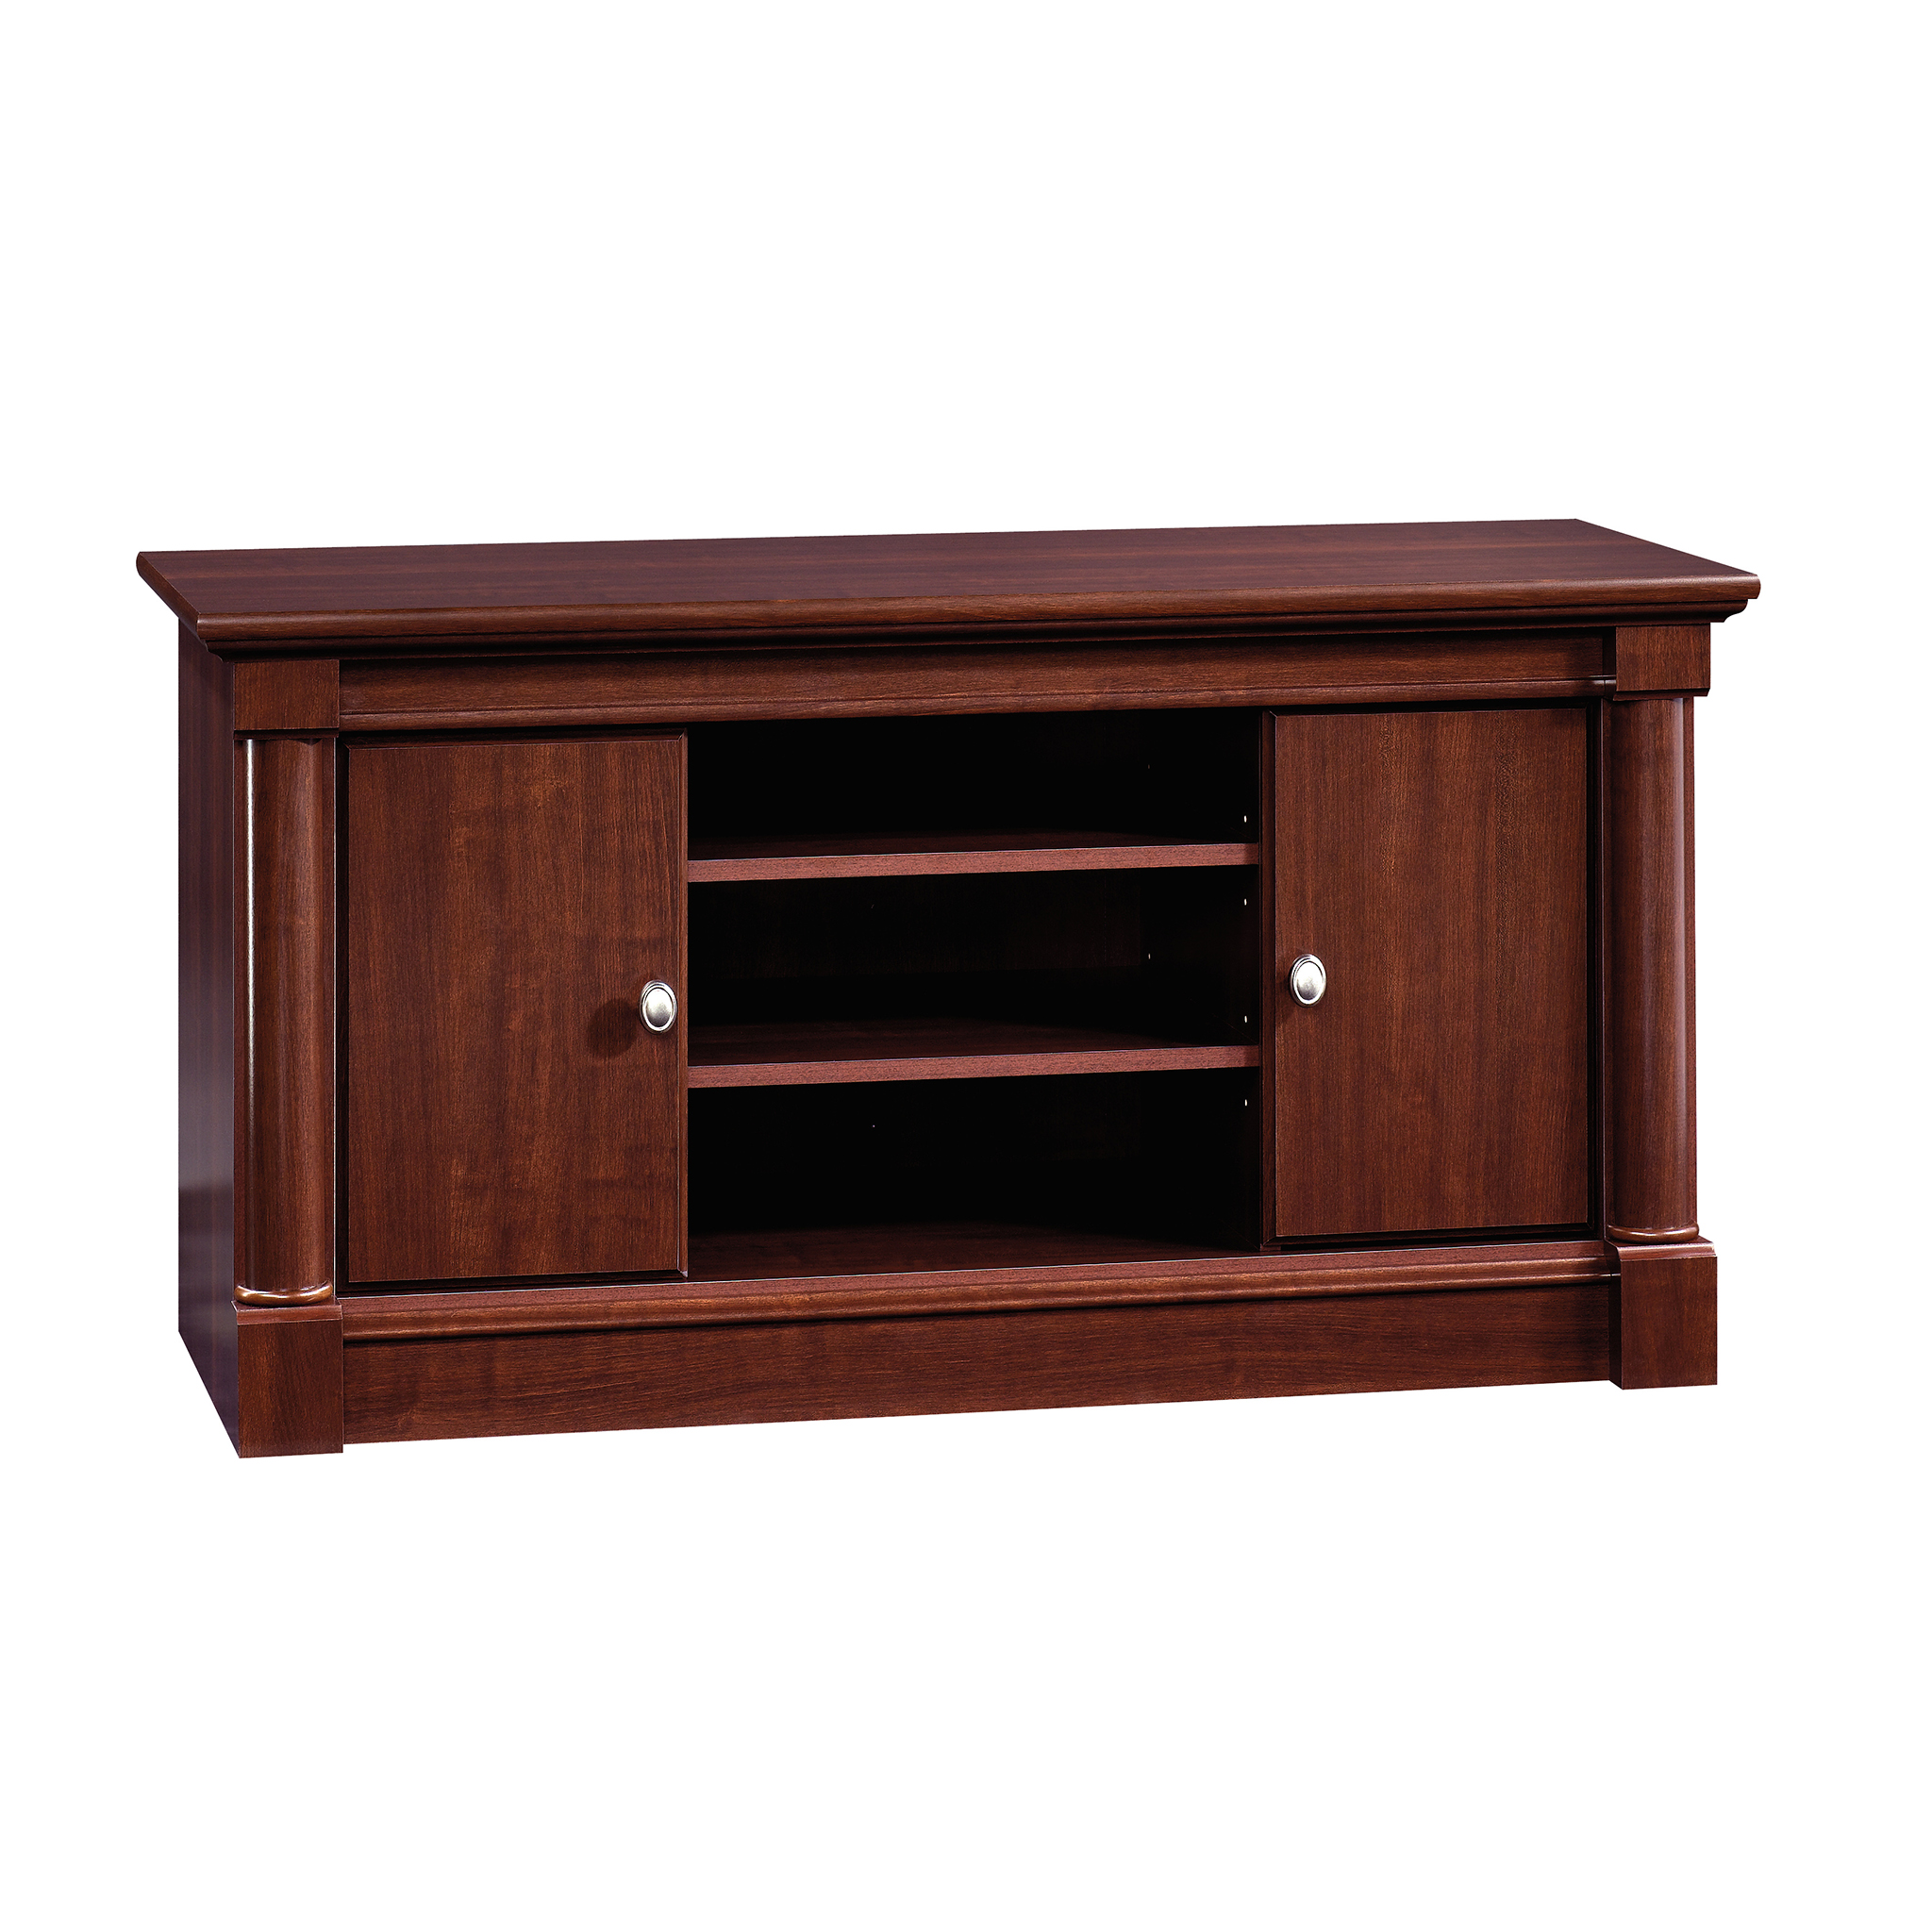 Sauder Palladia Panel TV Stand for TV's up to 50", Select Cherry Finish - image 2 of 4